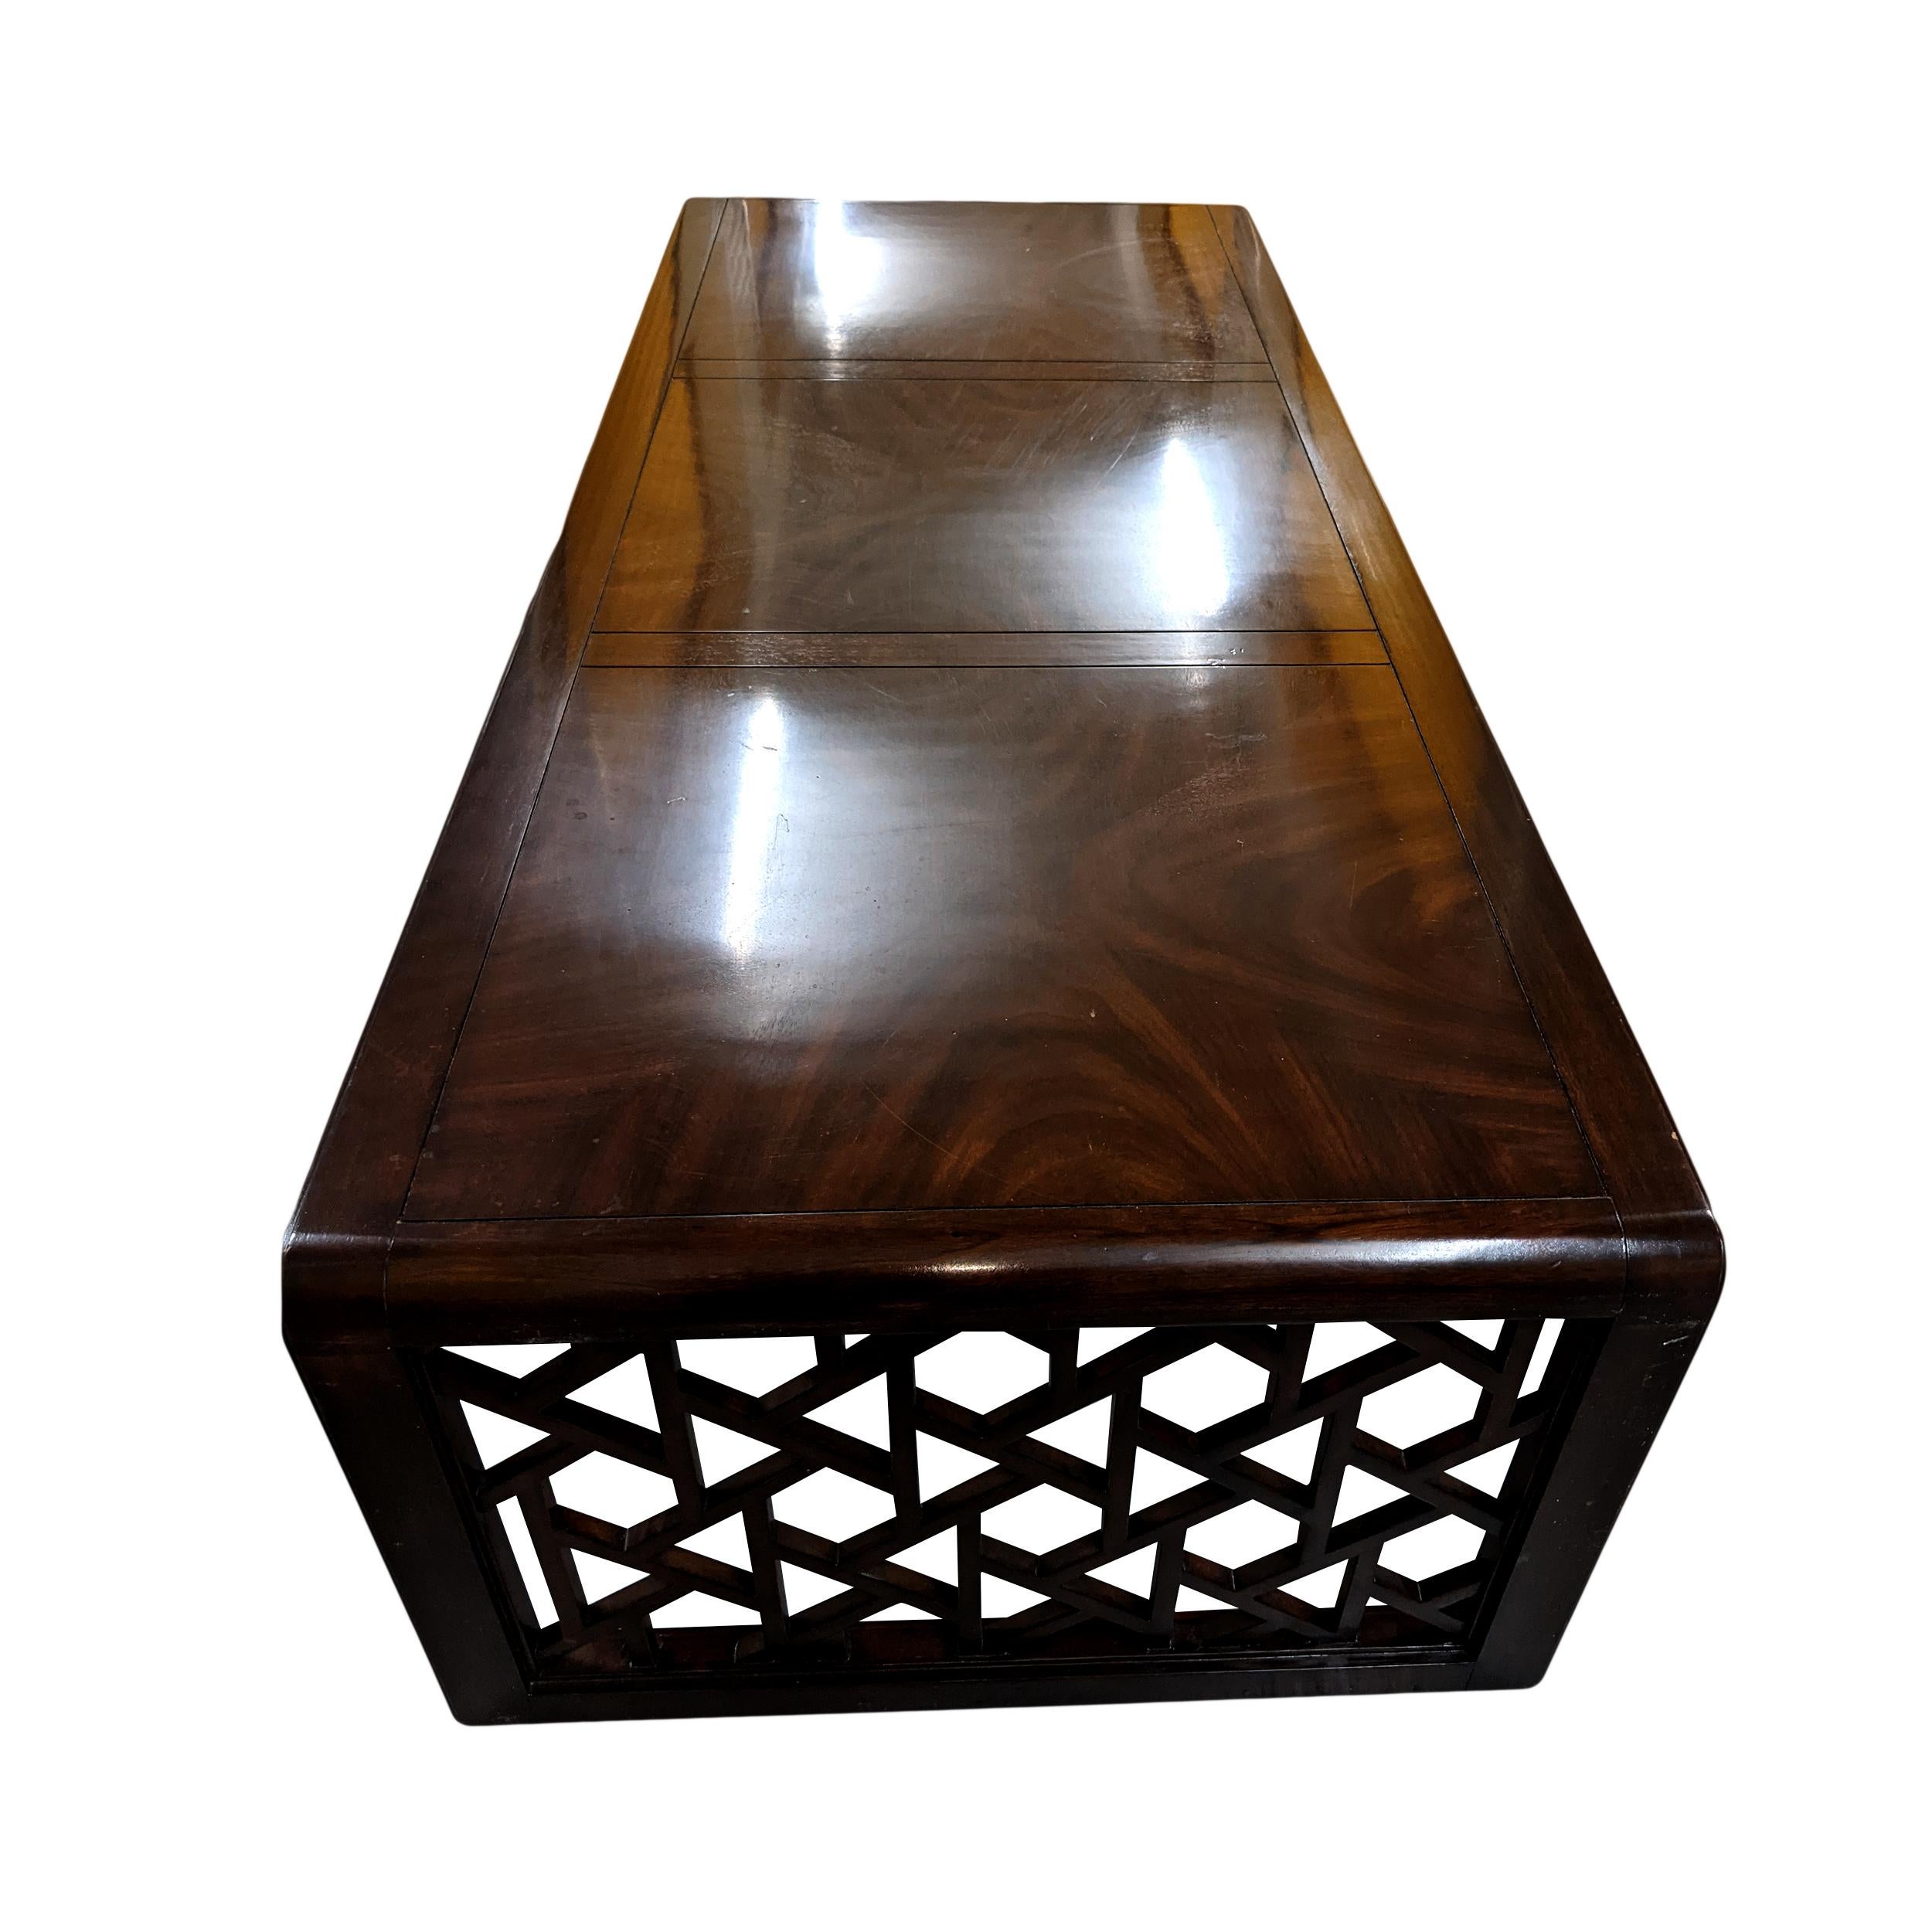 Chin hua waterfall coffee table with fretwork sides.

Walnut table with waterfall and carved fretwork sides attributed to Maitland Smith.
 